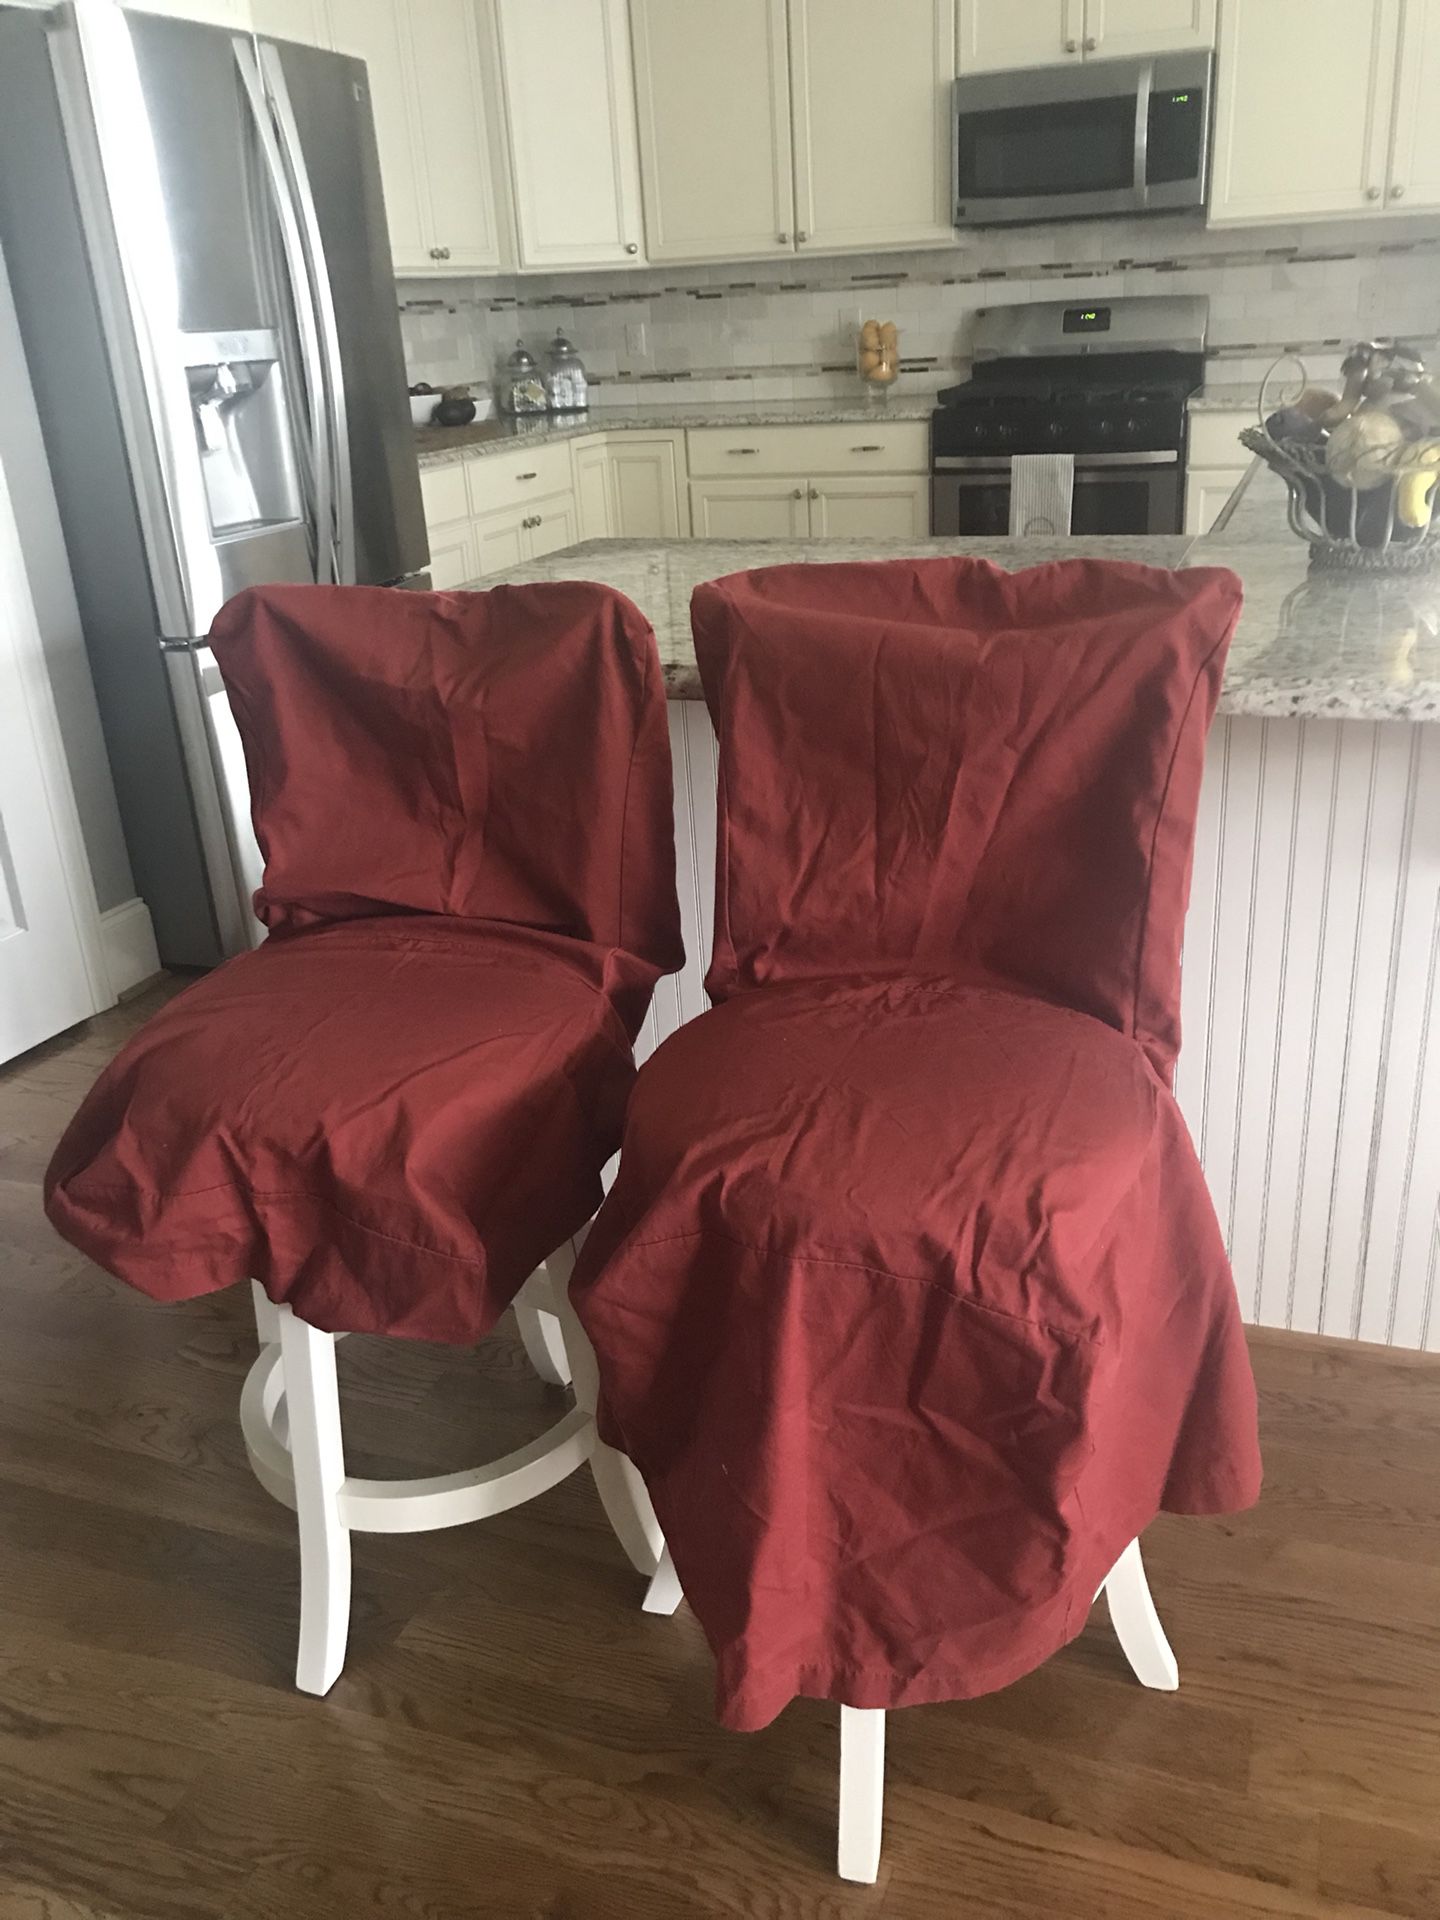 Pottery barn chair covers